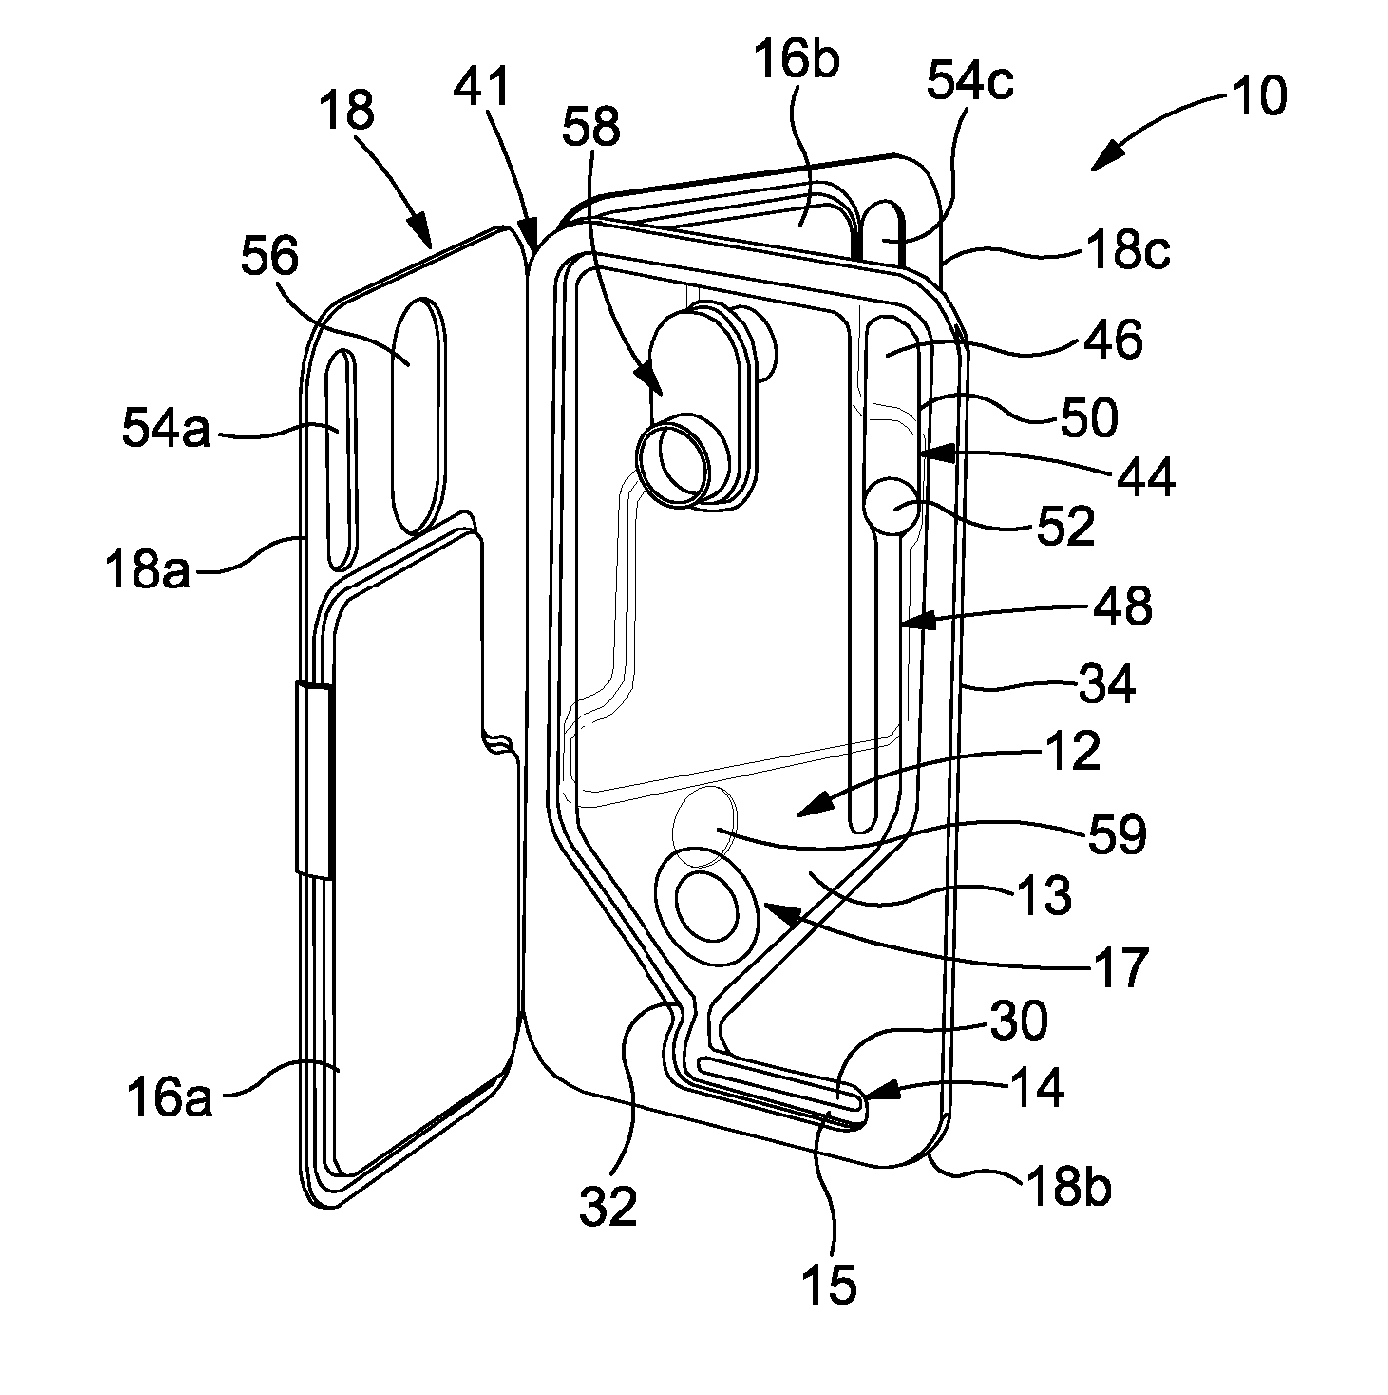 Exhaled breath condensate collector